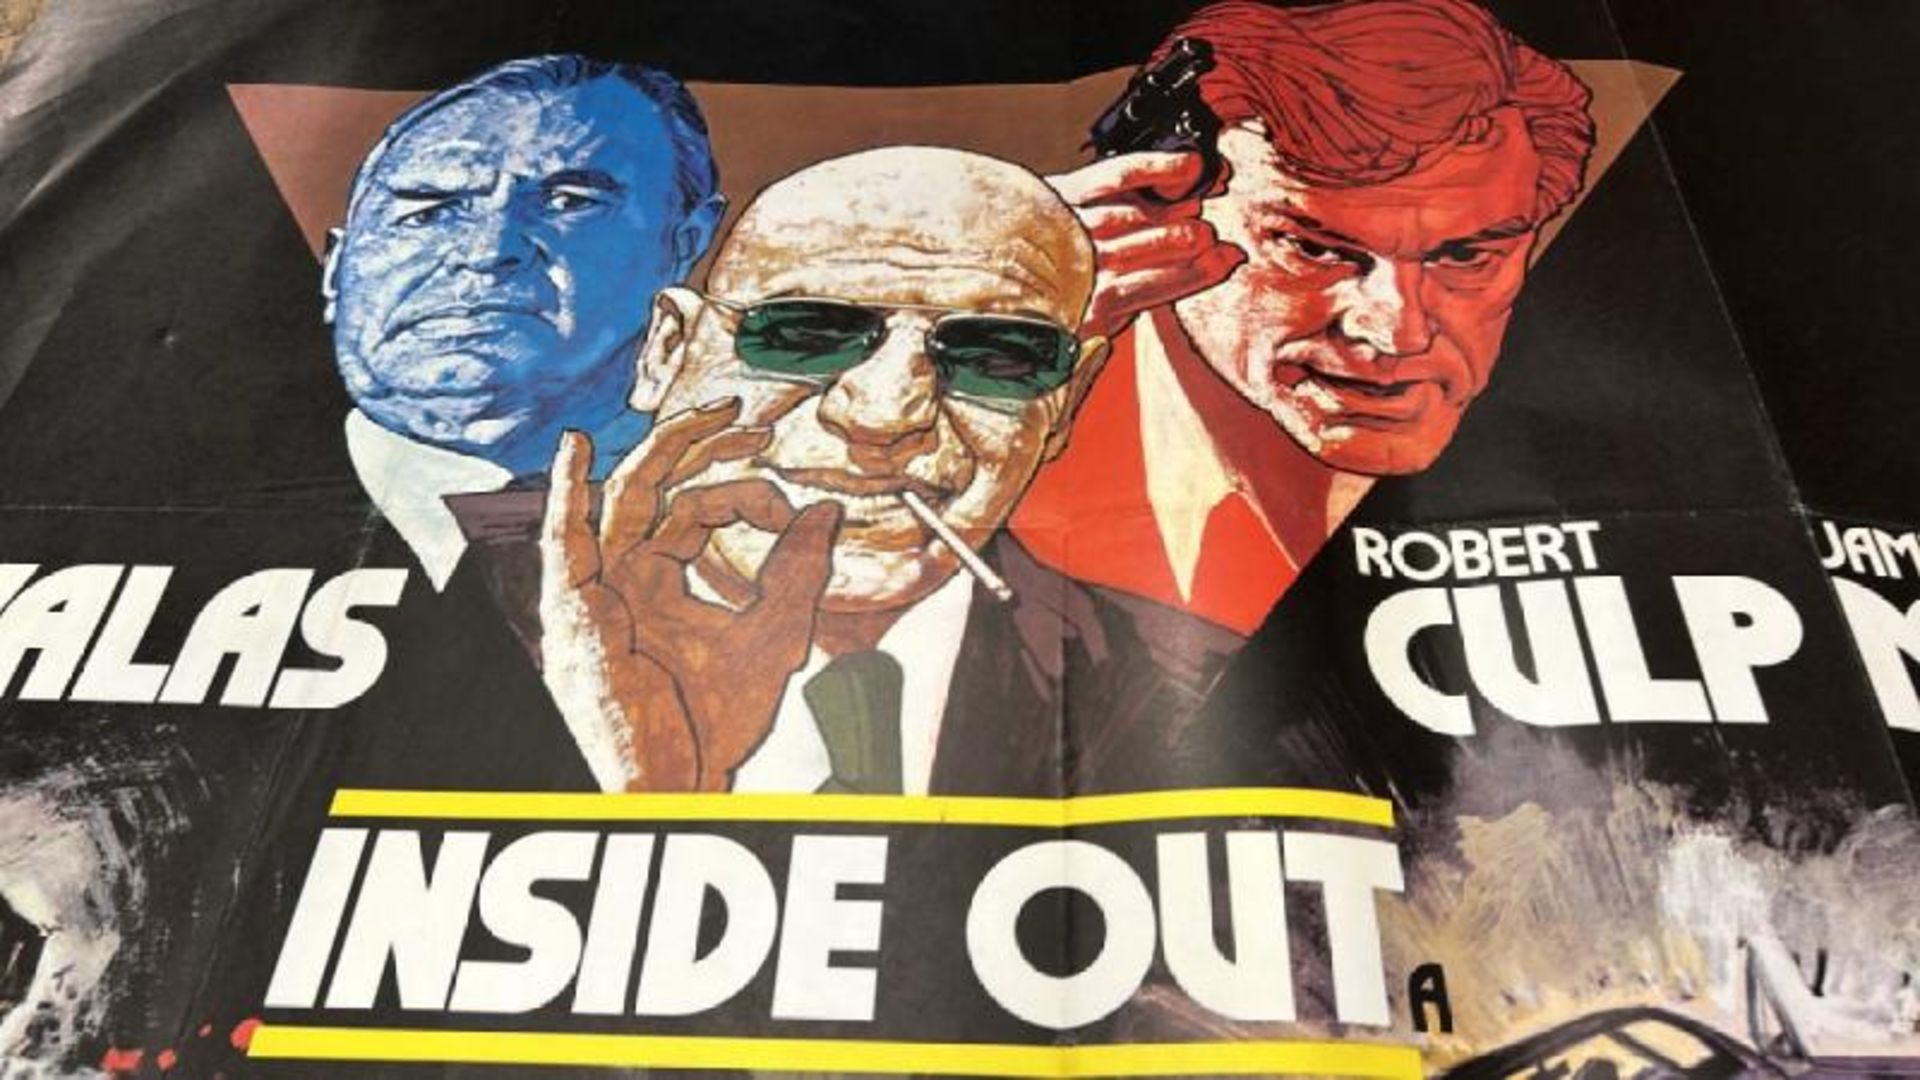 INSIDE OUT ORIGINAL POSTER PRINTED IN ENGLAND BY W. E. BERRY LTD BRADFORD, 101CM W X 77CM H, A - Image 4 of 6